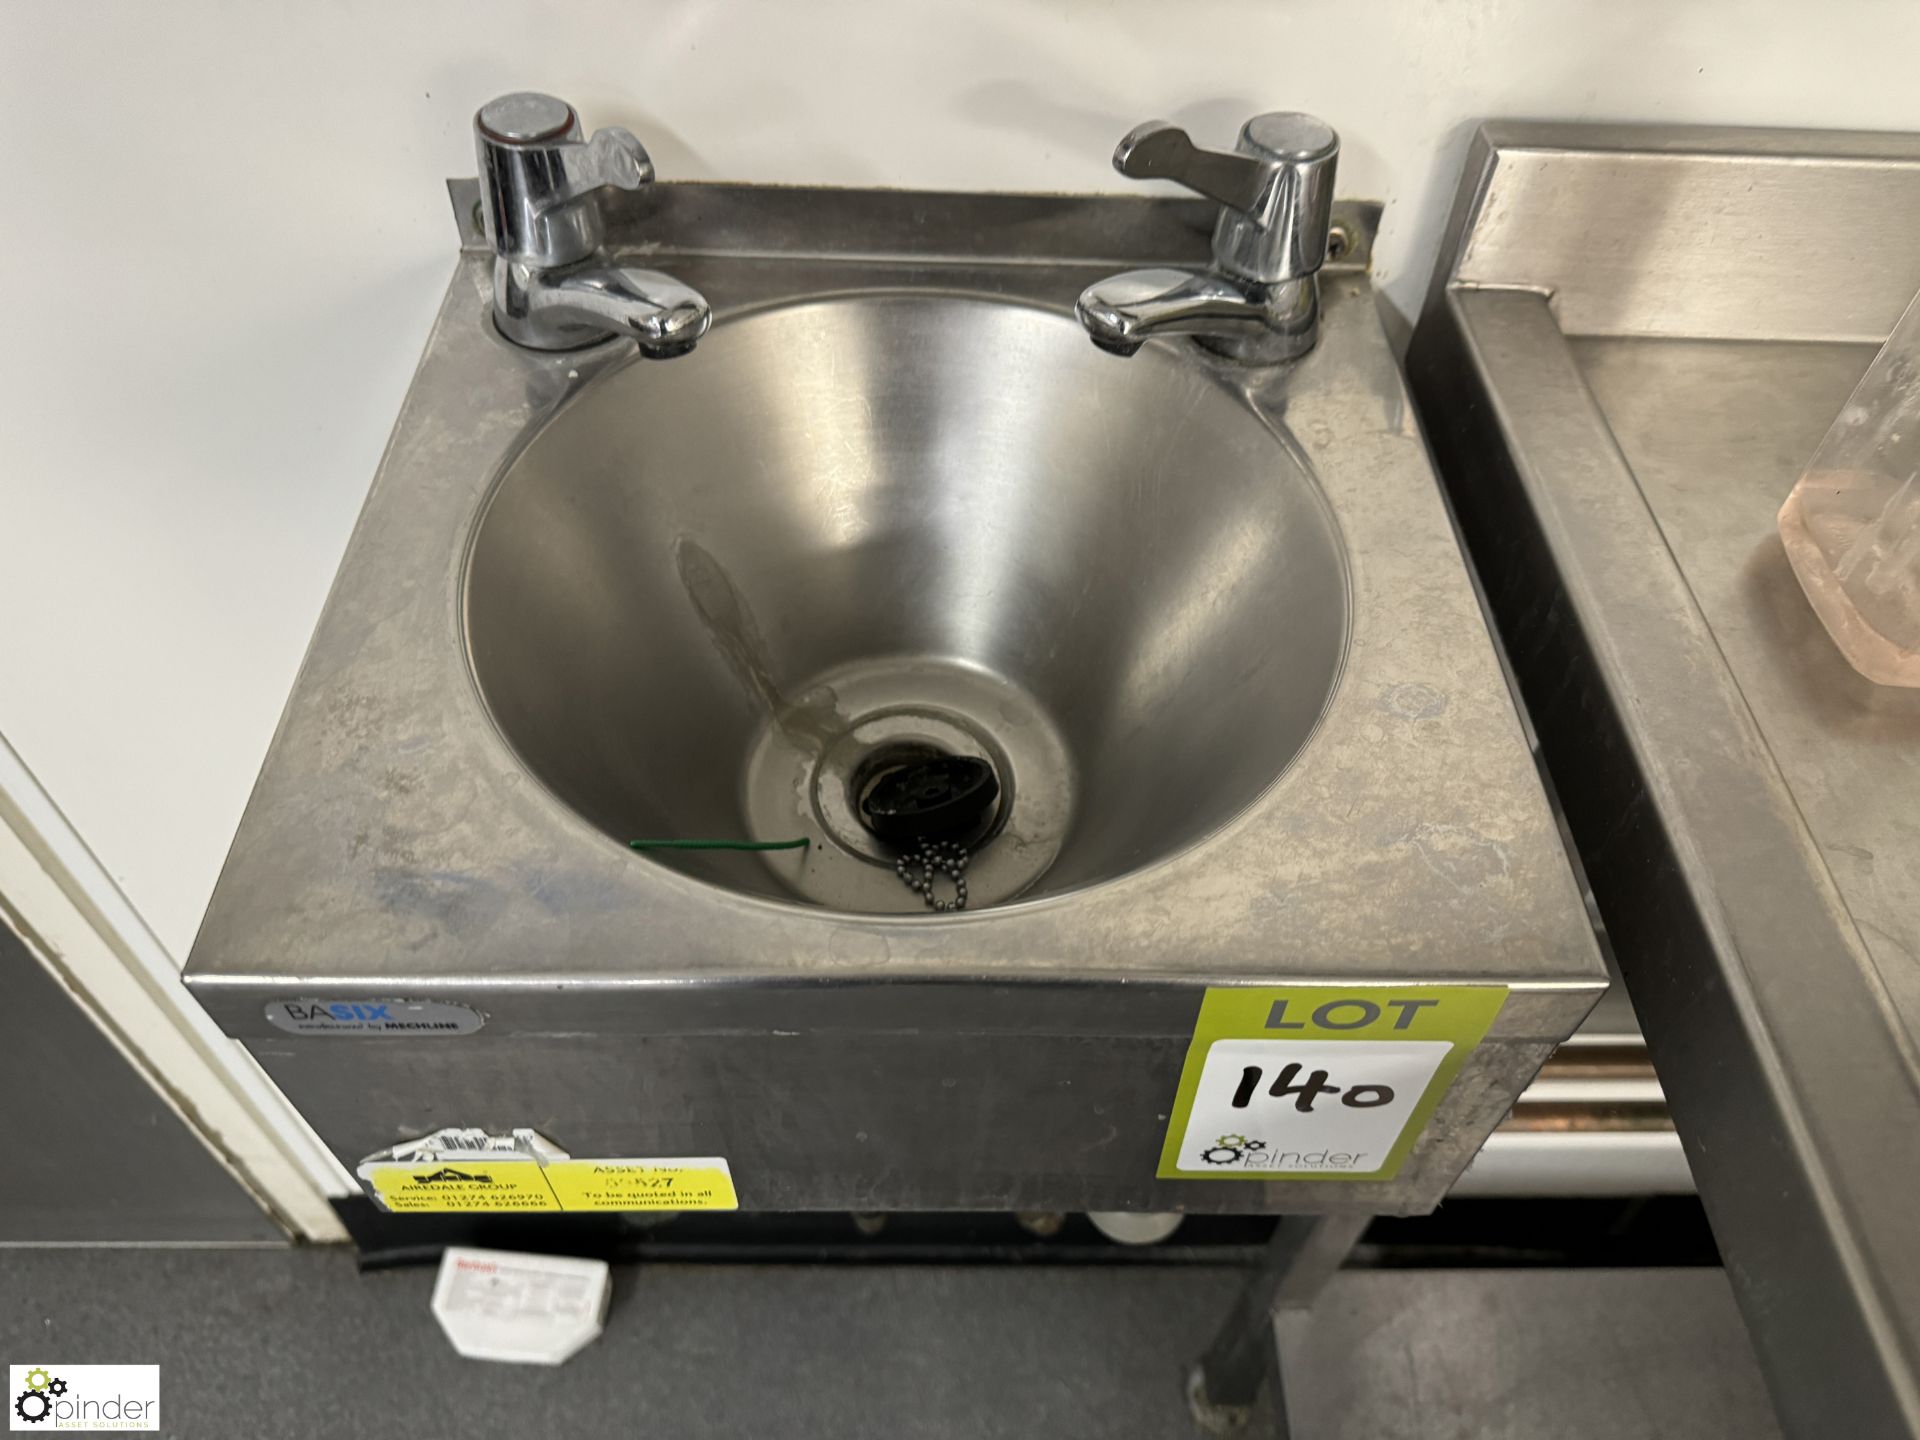 Stainless steel Hand Wash Basin, 380mm x 330mm (location in building - level 11 main kitchen) - Image 2 of 3